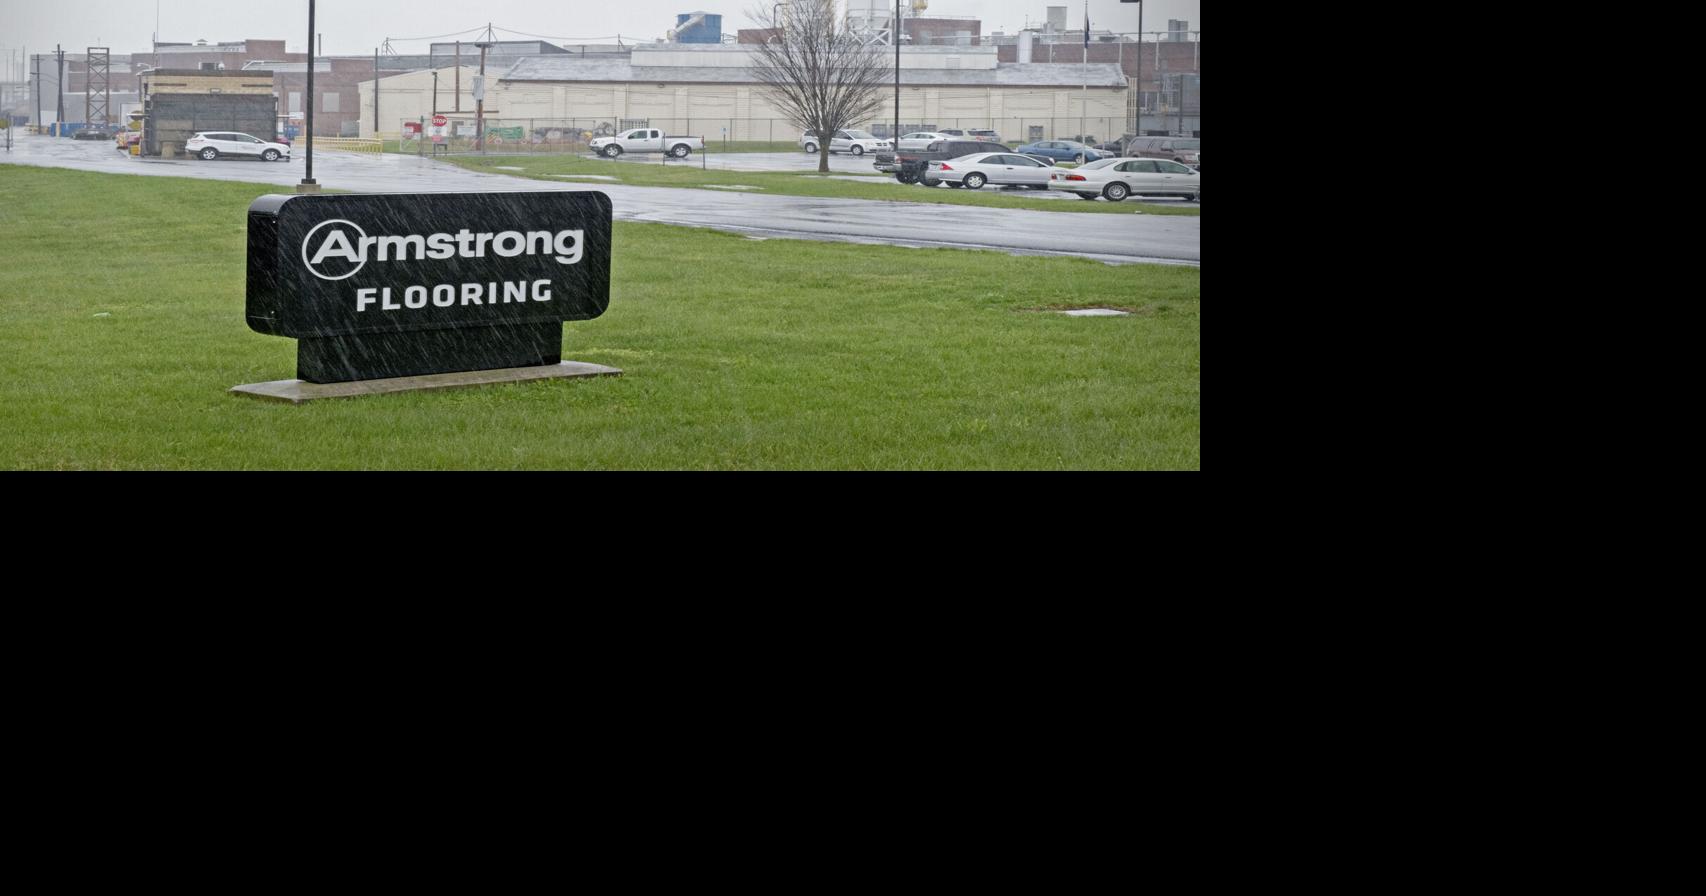 Local economic leaders, former company executive laud planned Armstrong Flooring sale; ‘Very best possible outcome’ | Local Business